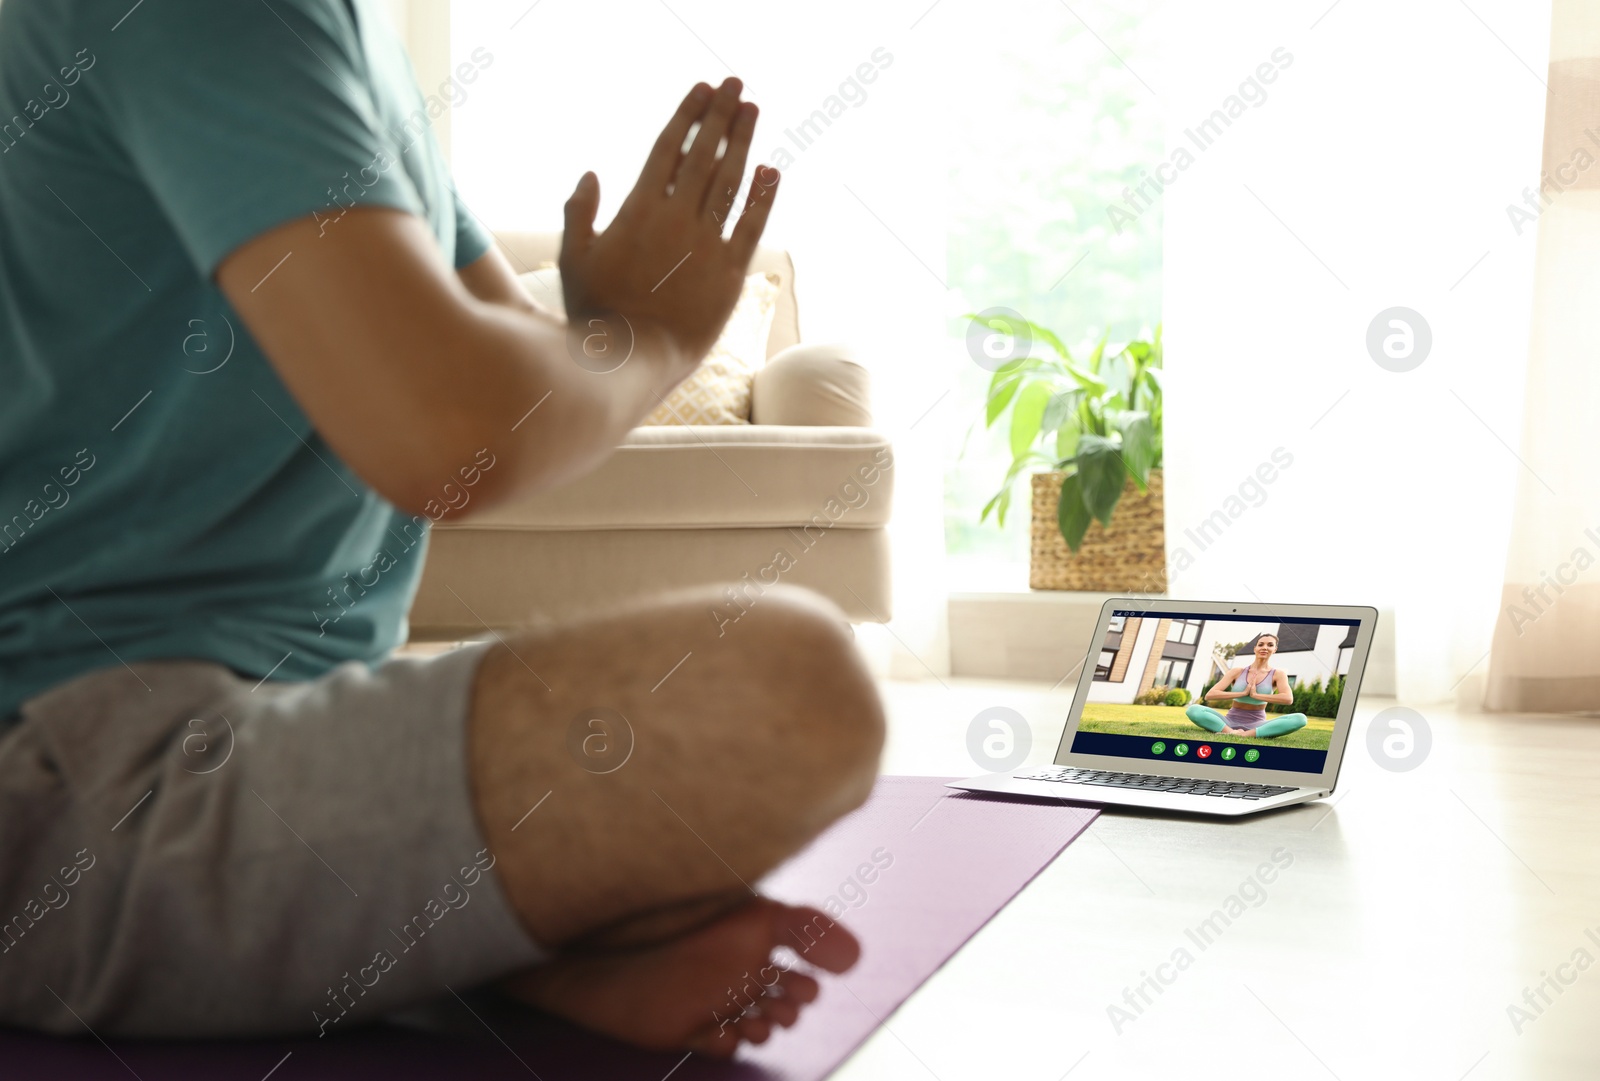 Image of Distance yoga course during coronavirus pandemic. Man having online practice with instructor via laptop at home, closeup